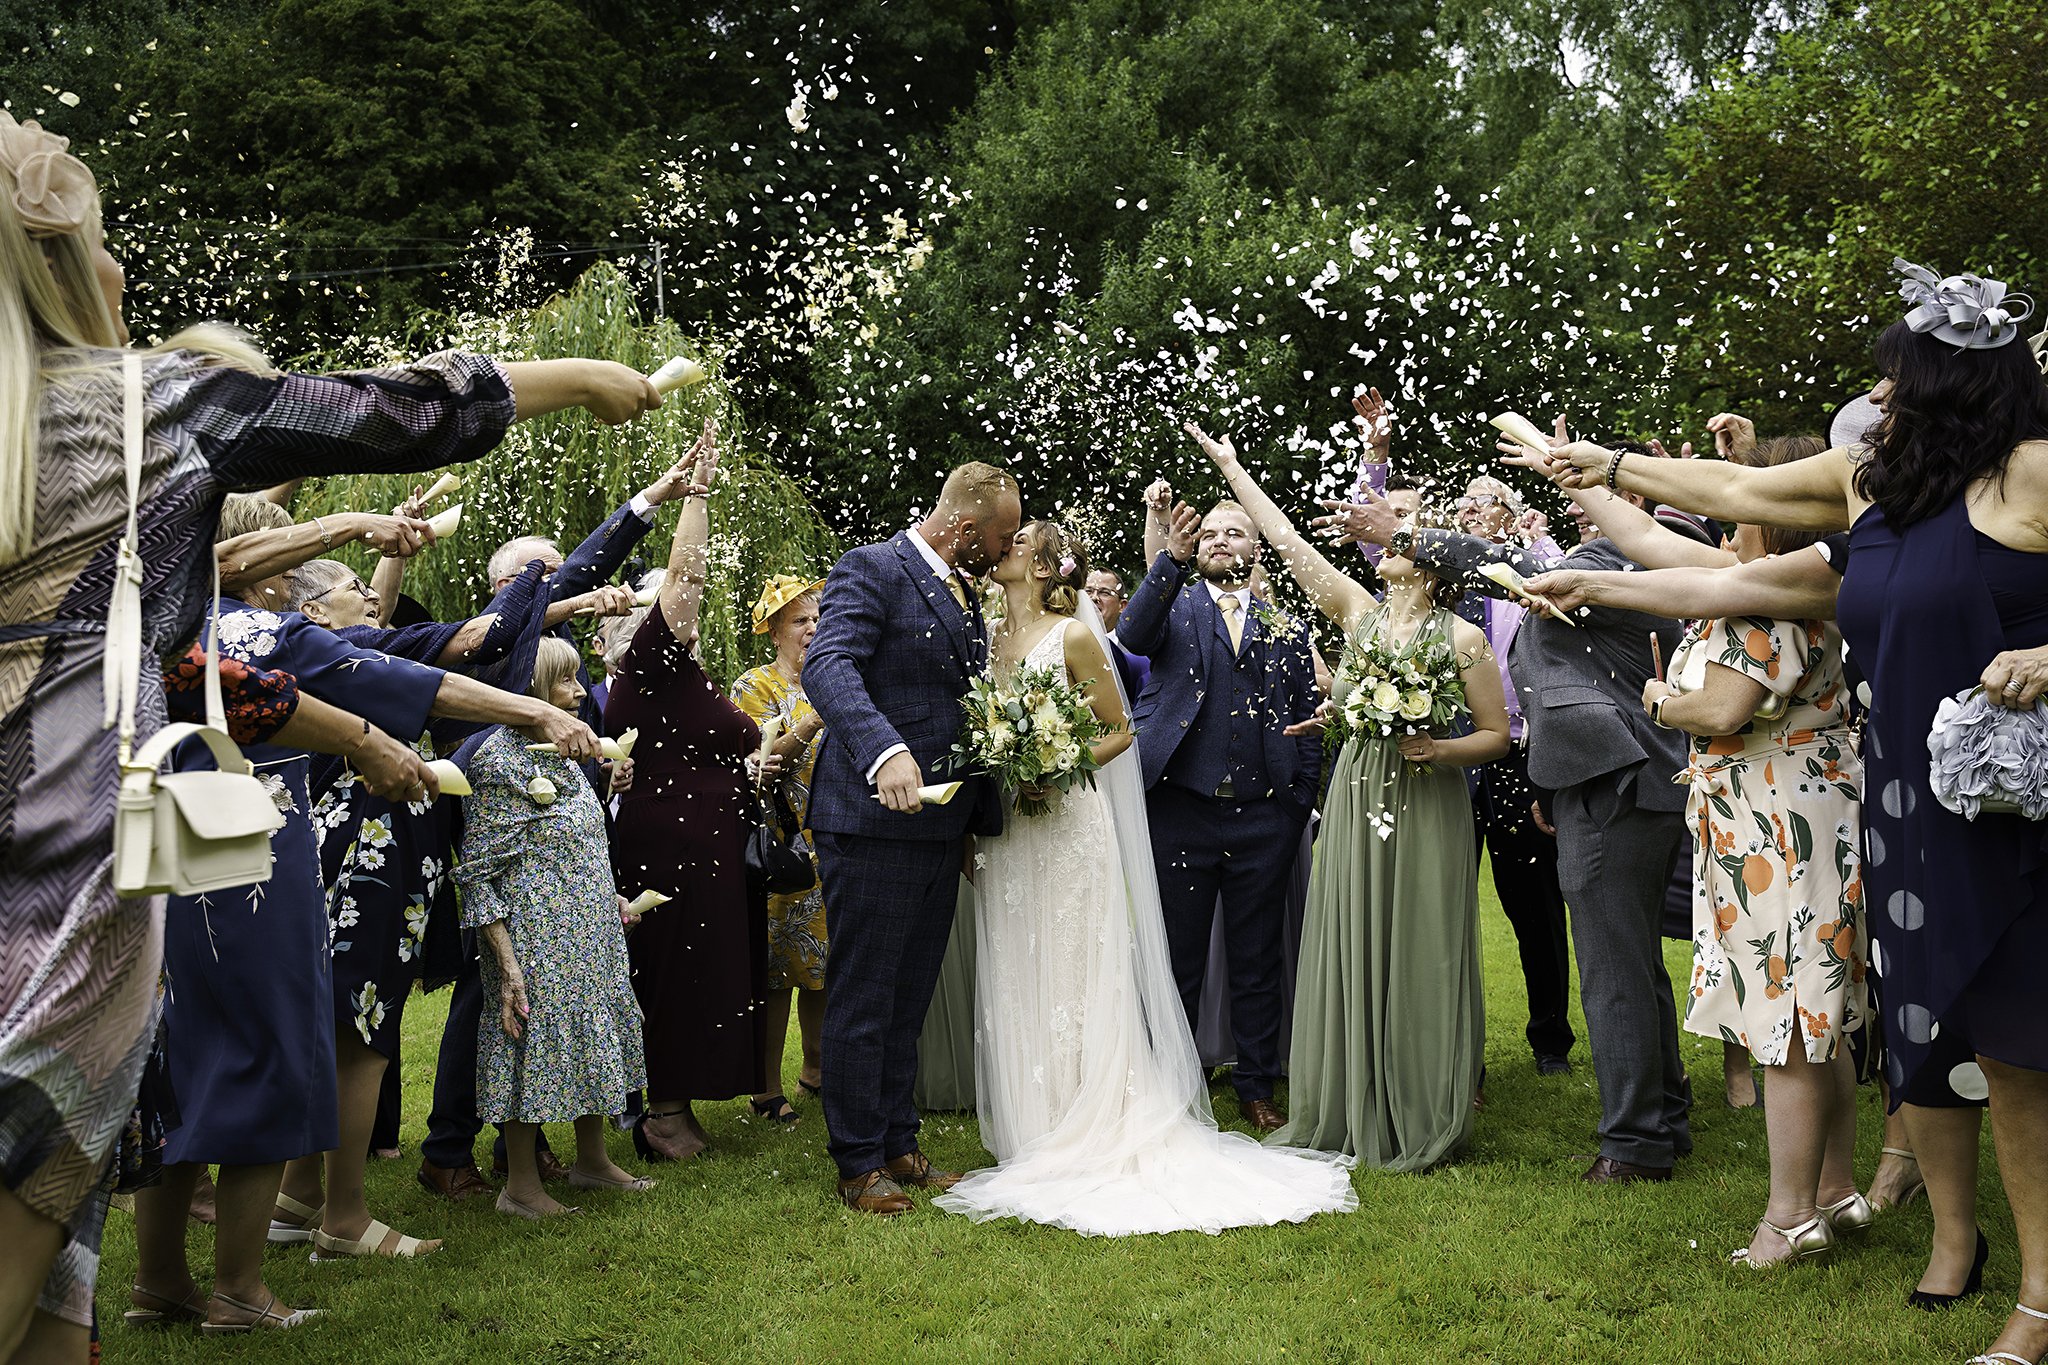  Confetti is thrown over a bride and groom at a wedding reception 